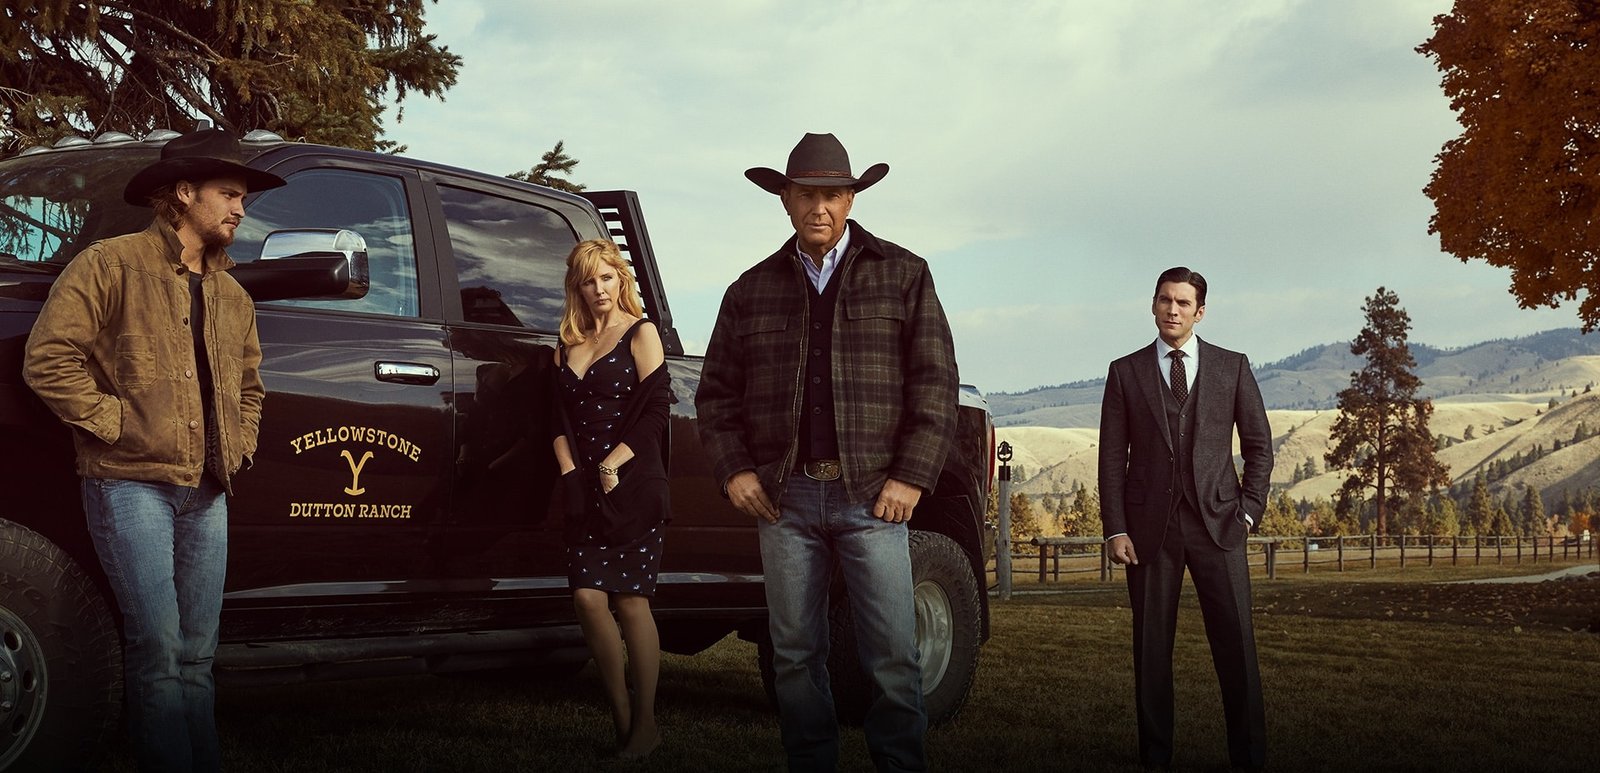 Is Yellowstone a good show?